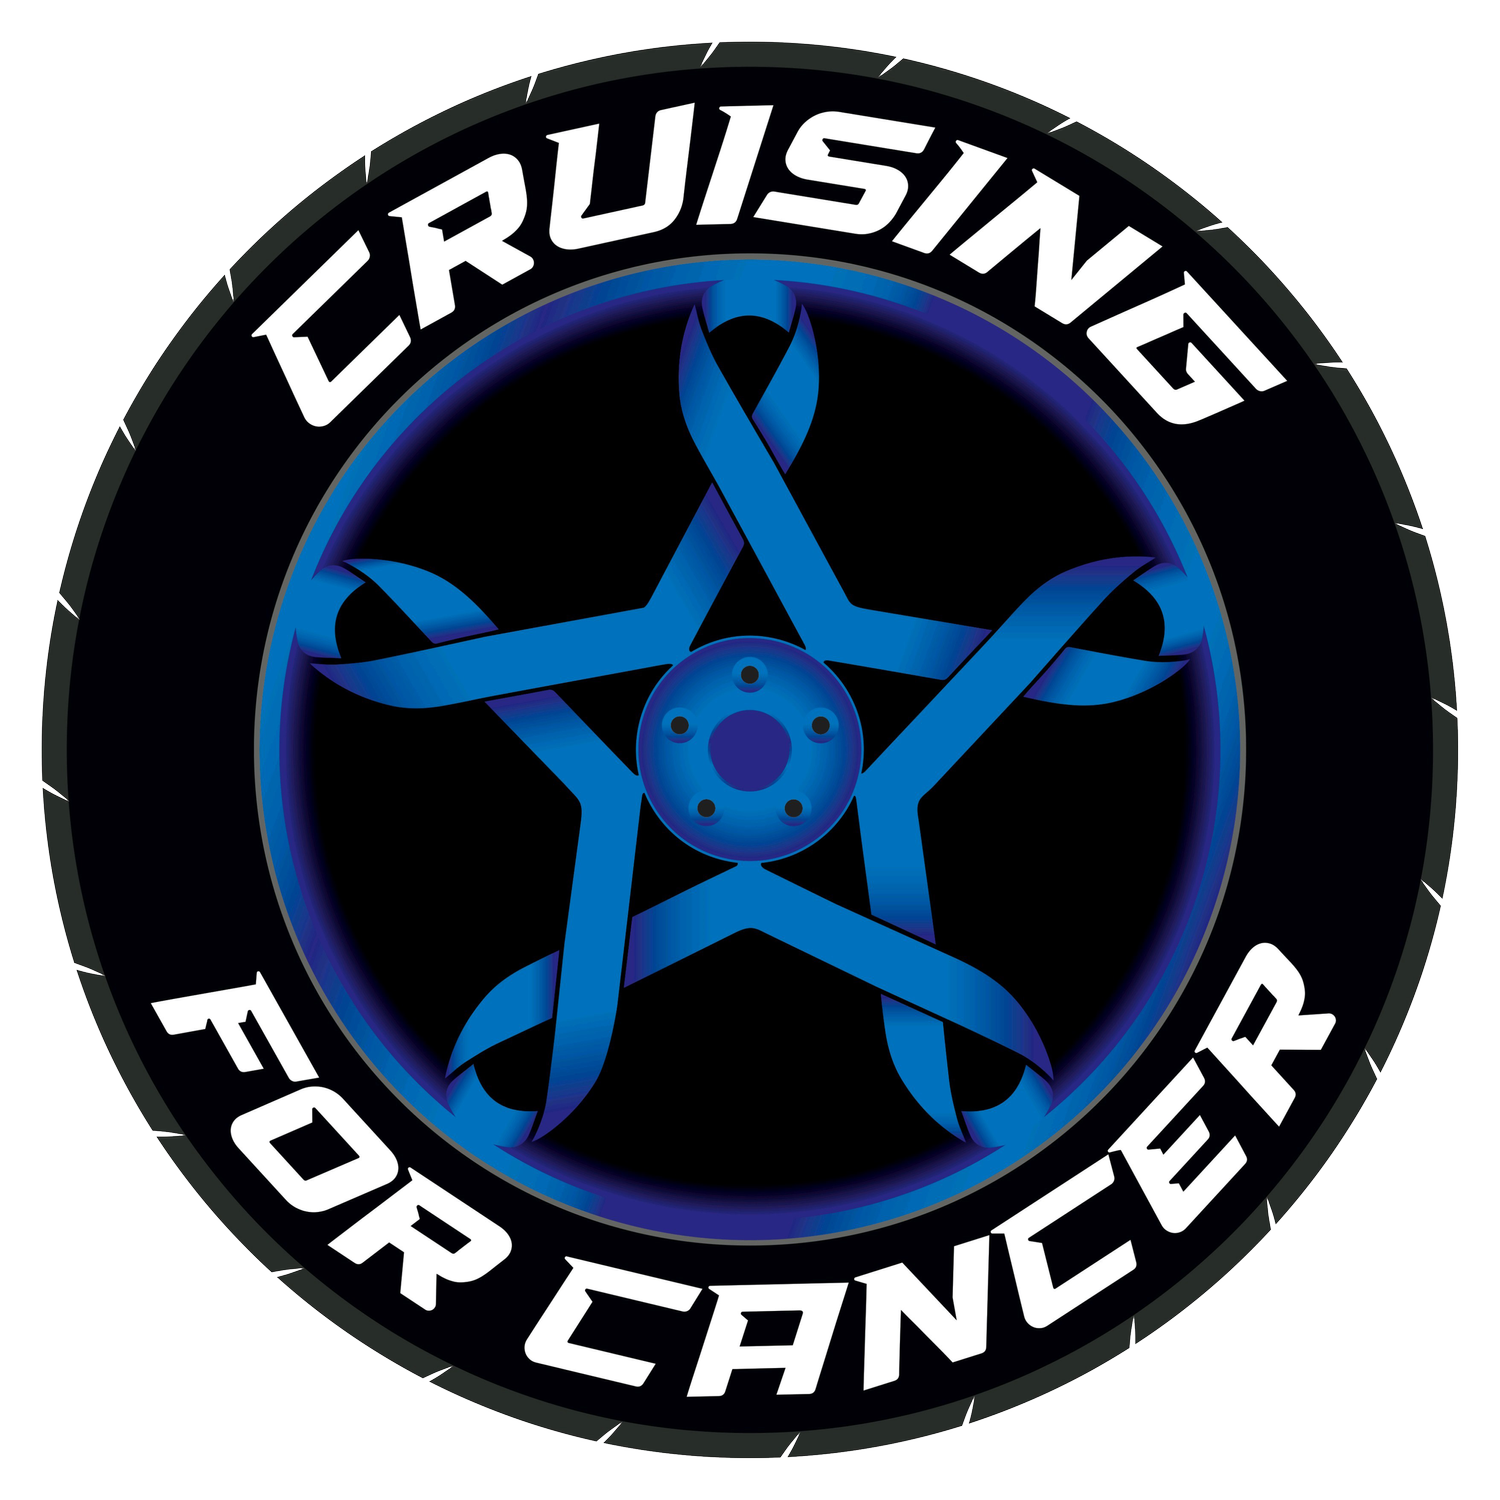 Cruising For Cancer